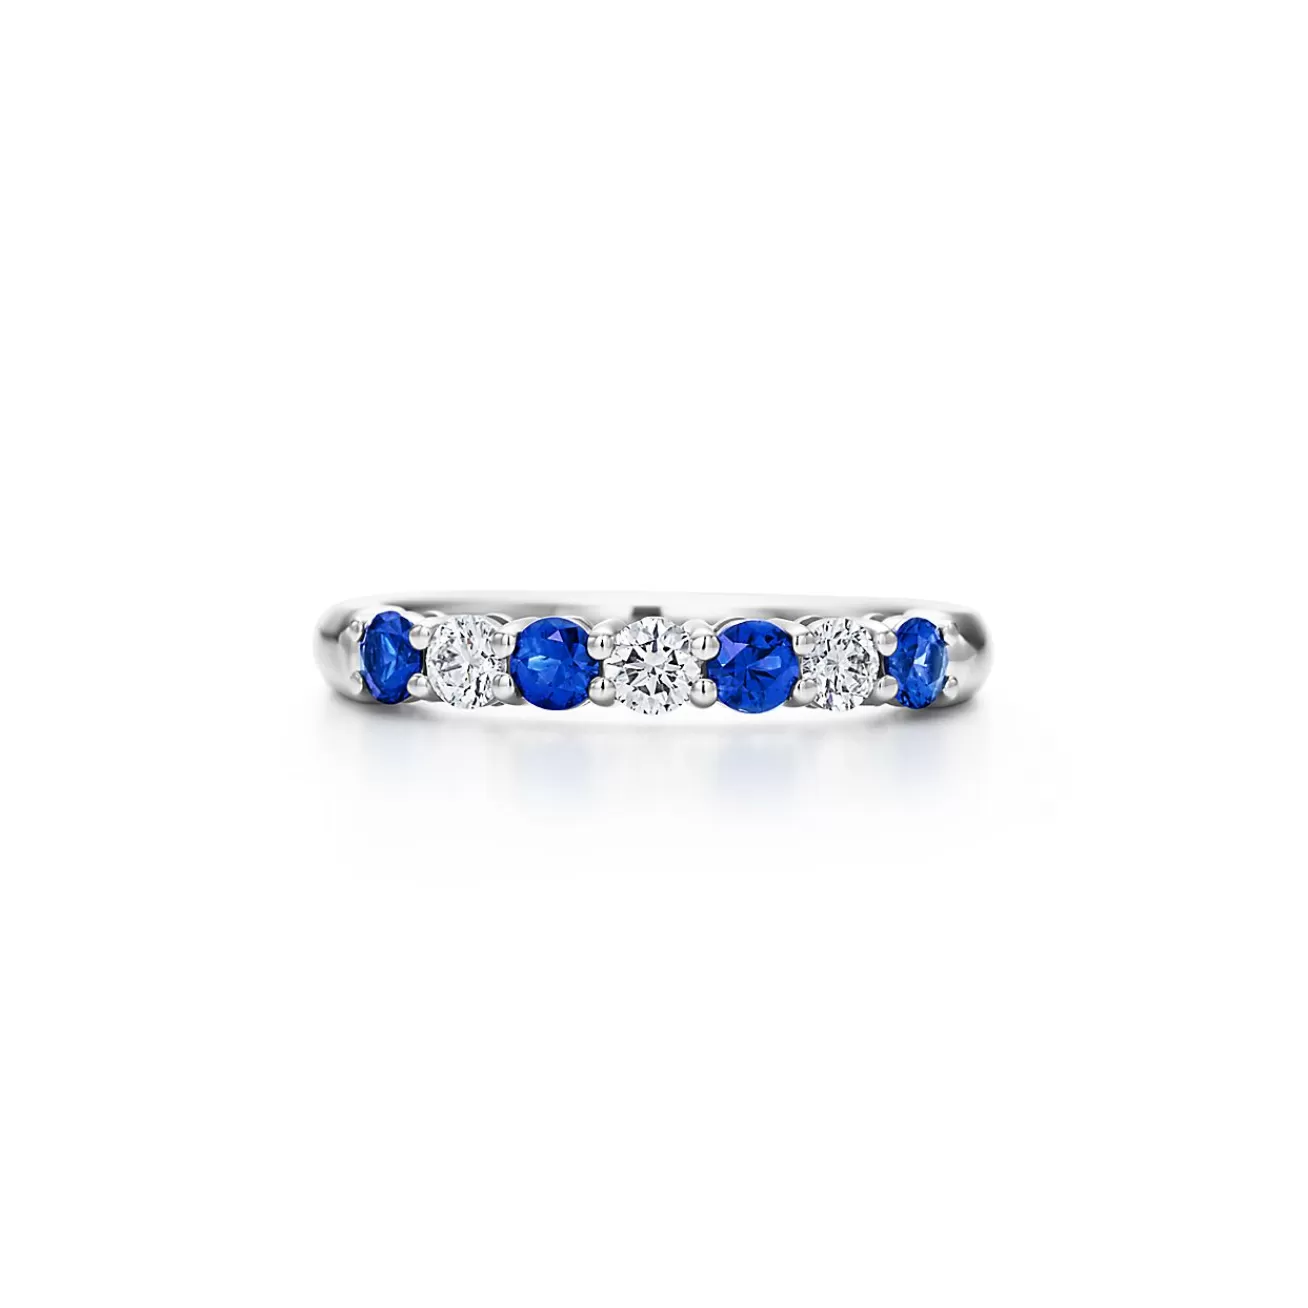 Tiffany & Co. Tiffany Forever Band Ring in Platinum with a Half-circle of Sapphires & Diamonds | ^Women Rings | Stacking Rings